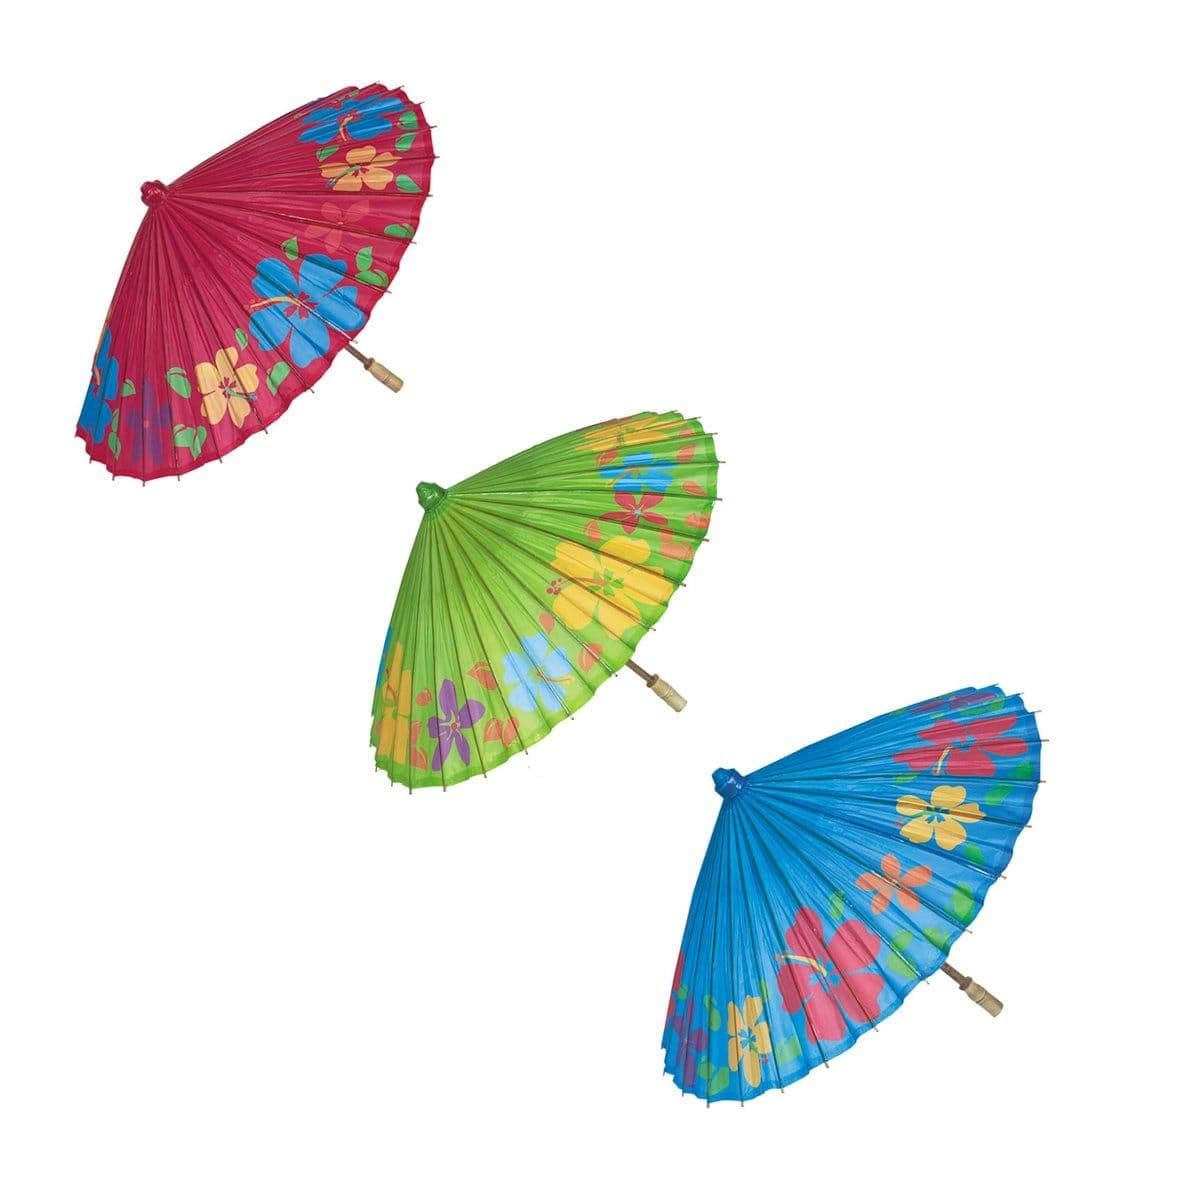 Buy Theme Party Summer Parasol - Assortment sold at Party Expert